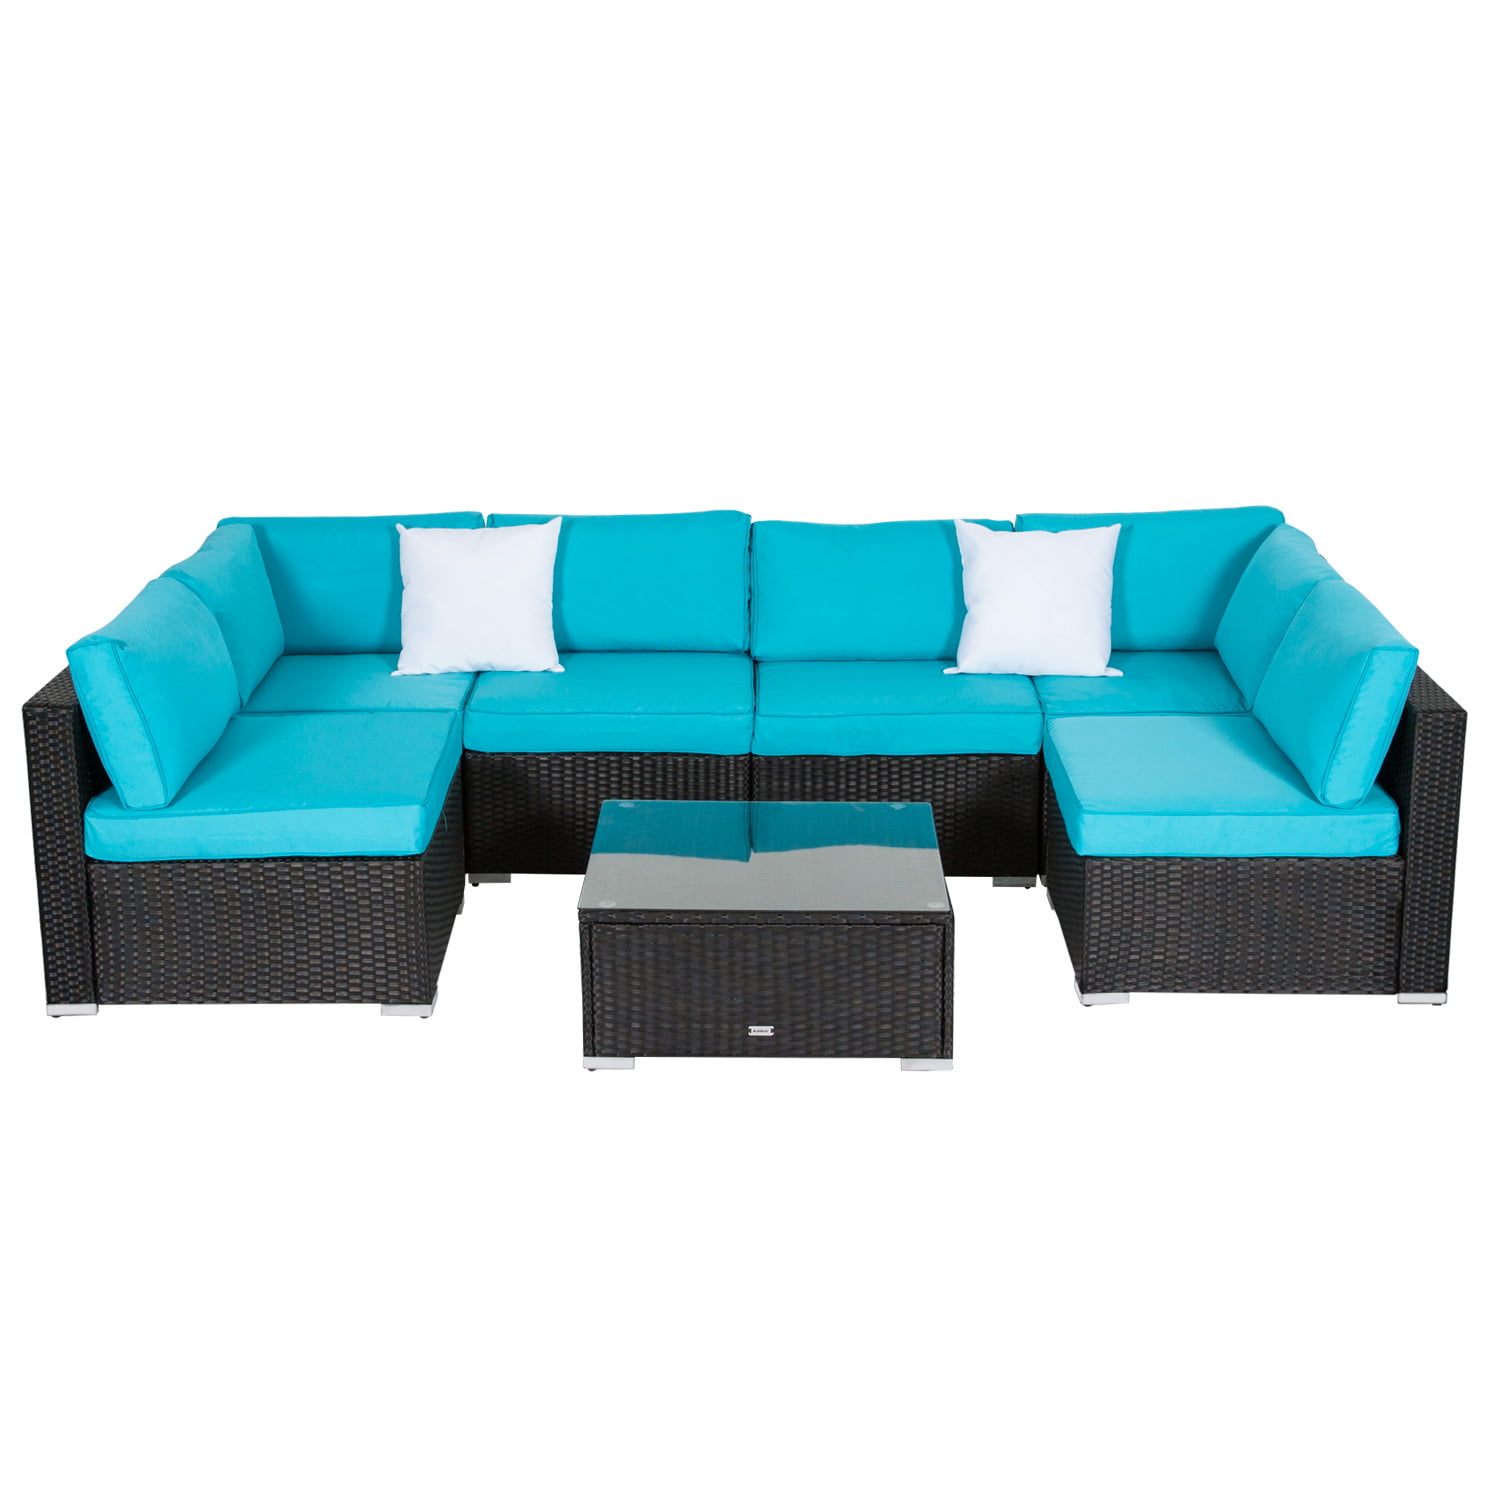 Kinbor 2 Piece Patio Backyard Furniture Sets All-Weather Rattan Sectional Sofa with Washable Couch Cushions Loveseats Turquoise 